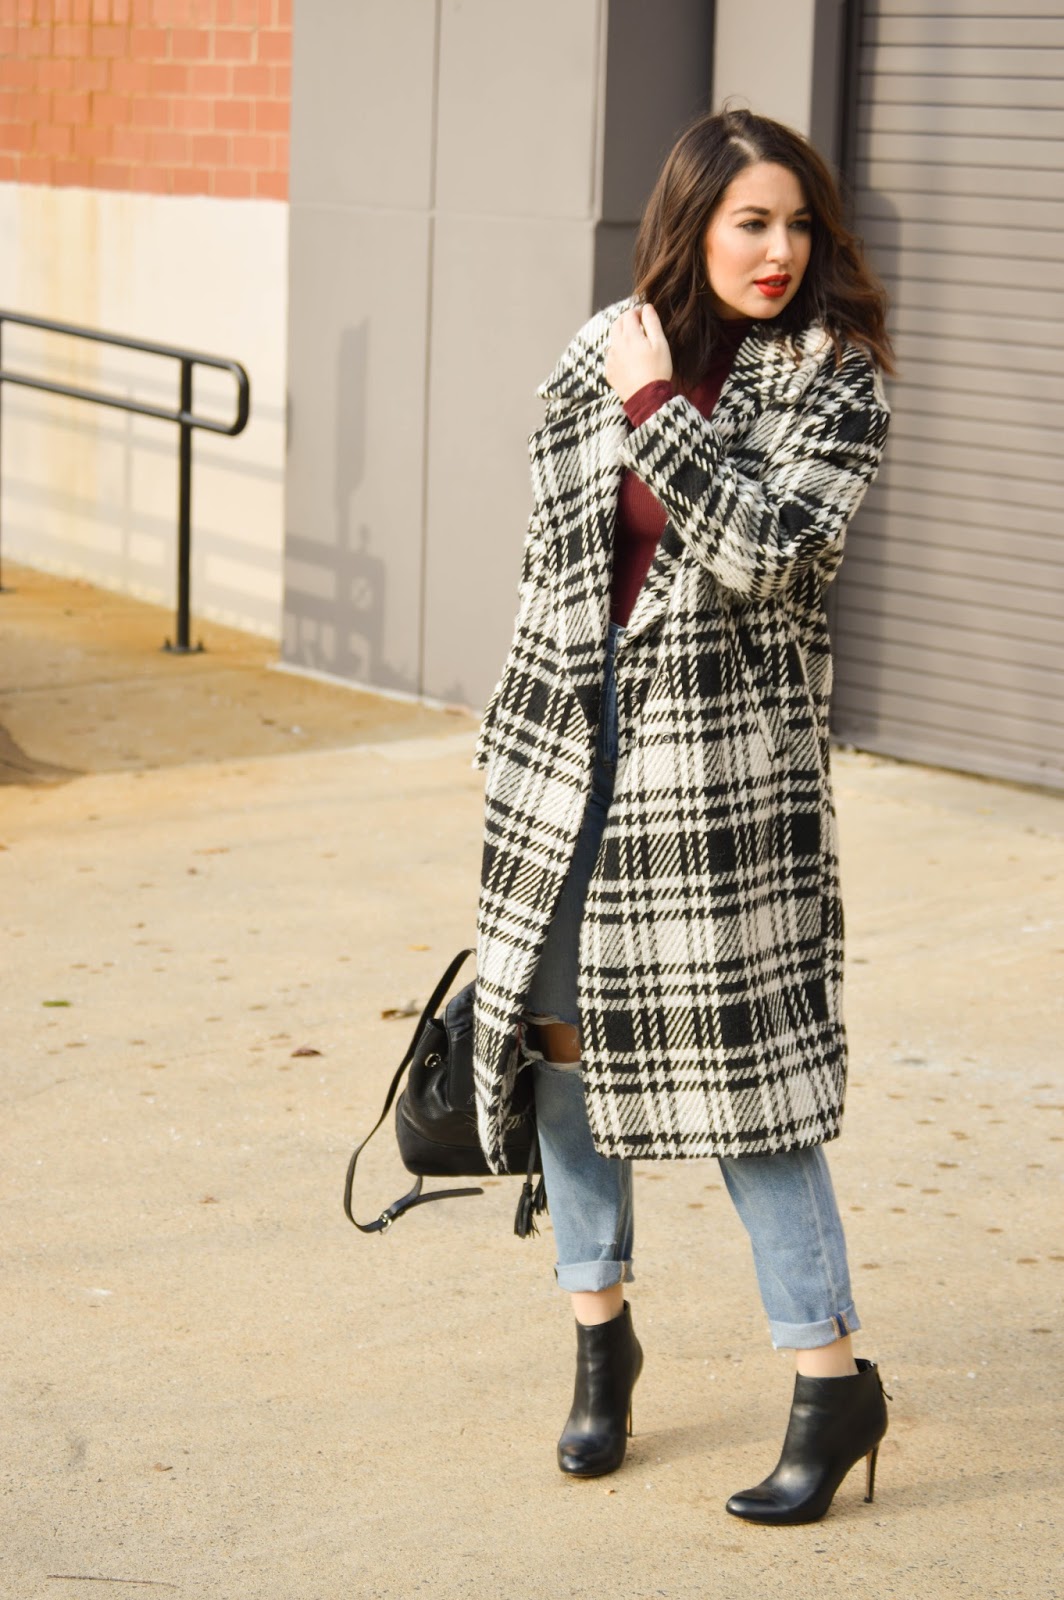 Rosy Outlook: Styling a Checkered Coat